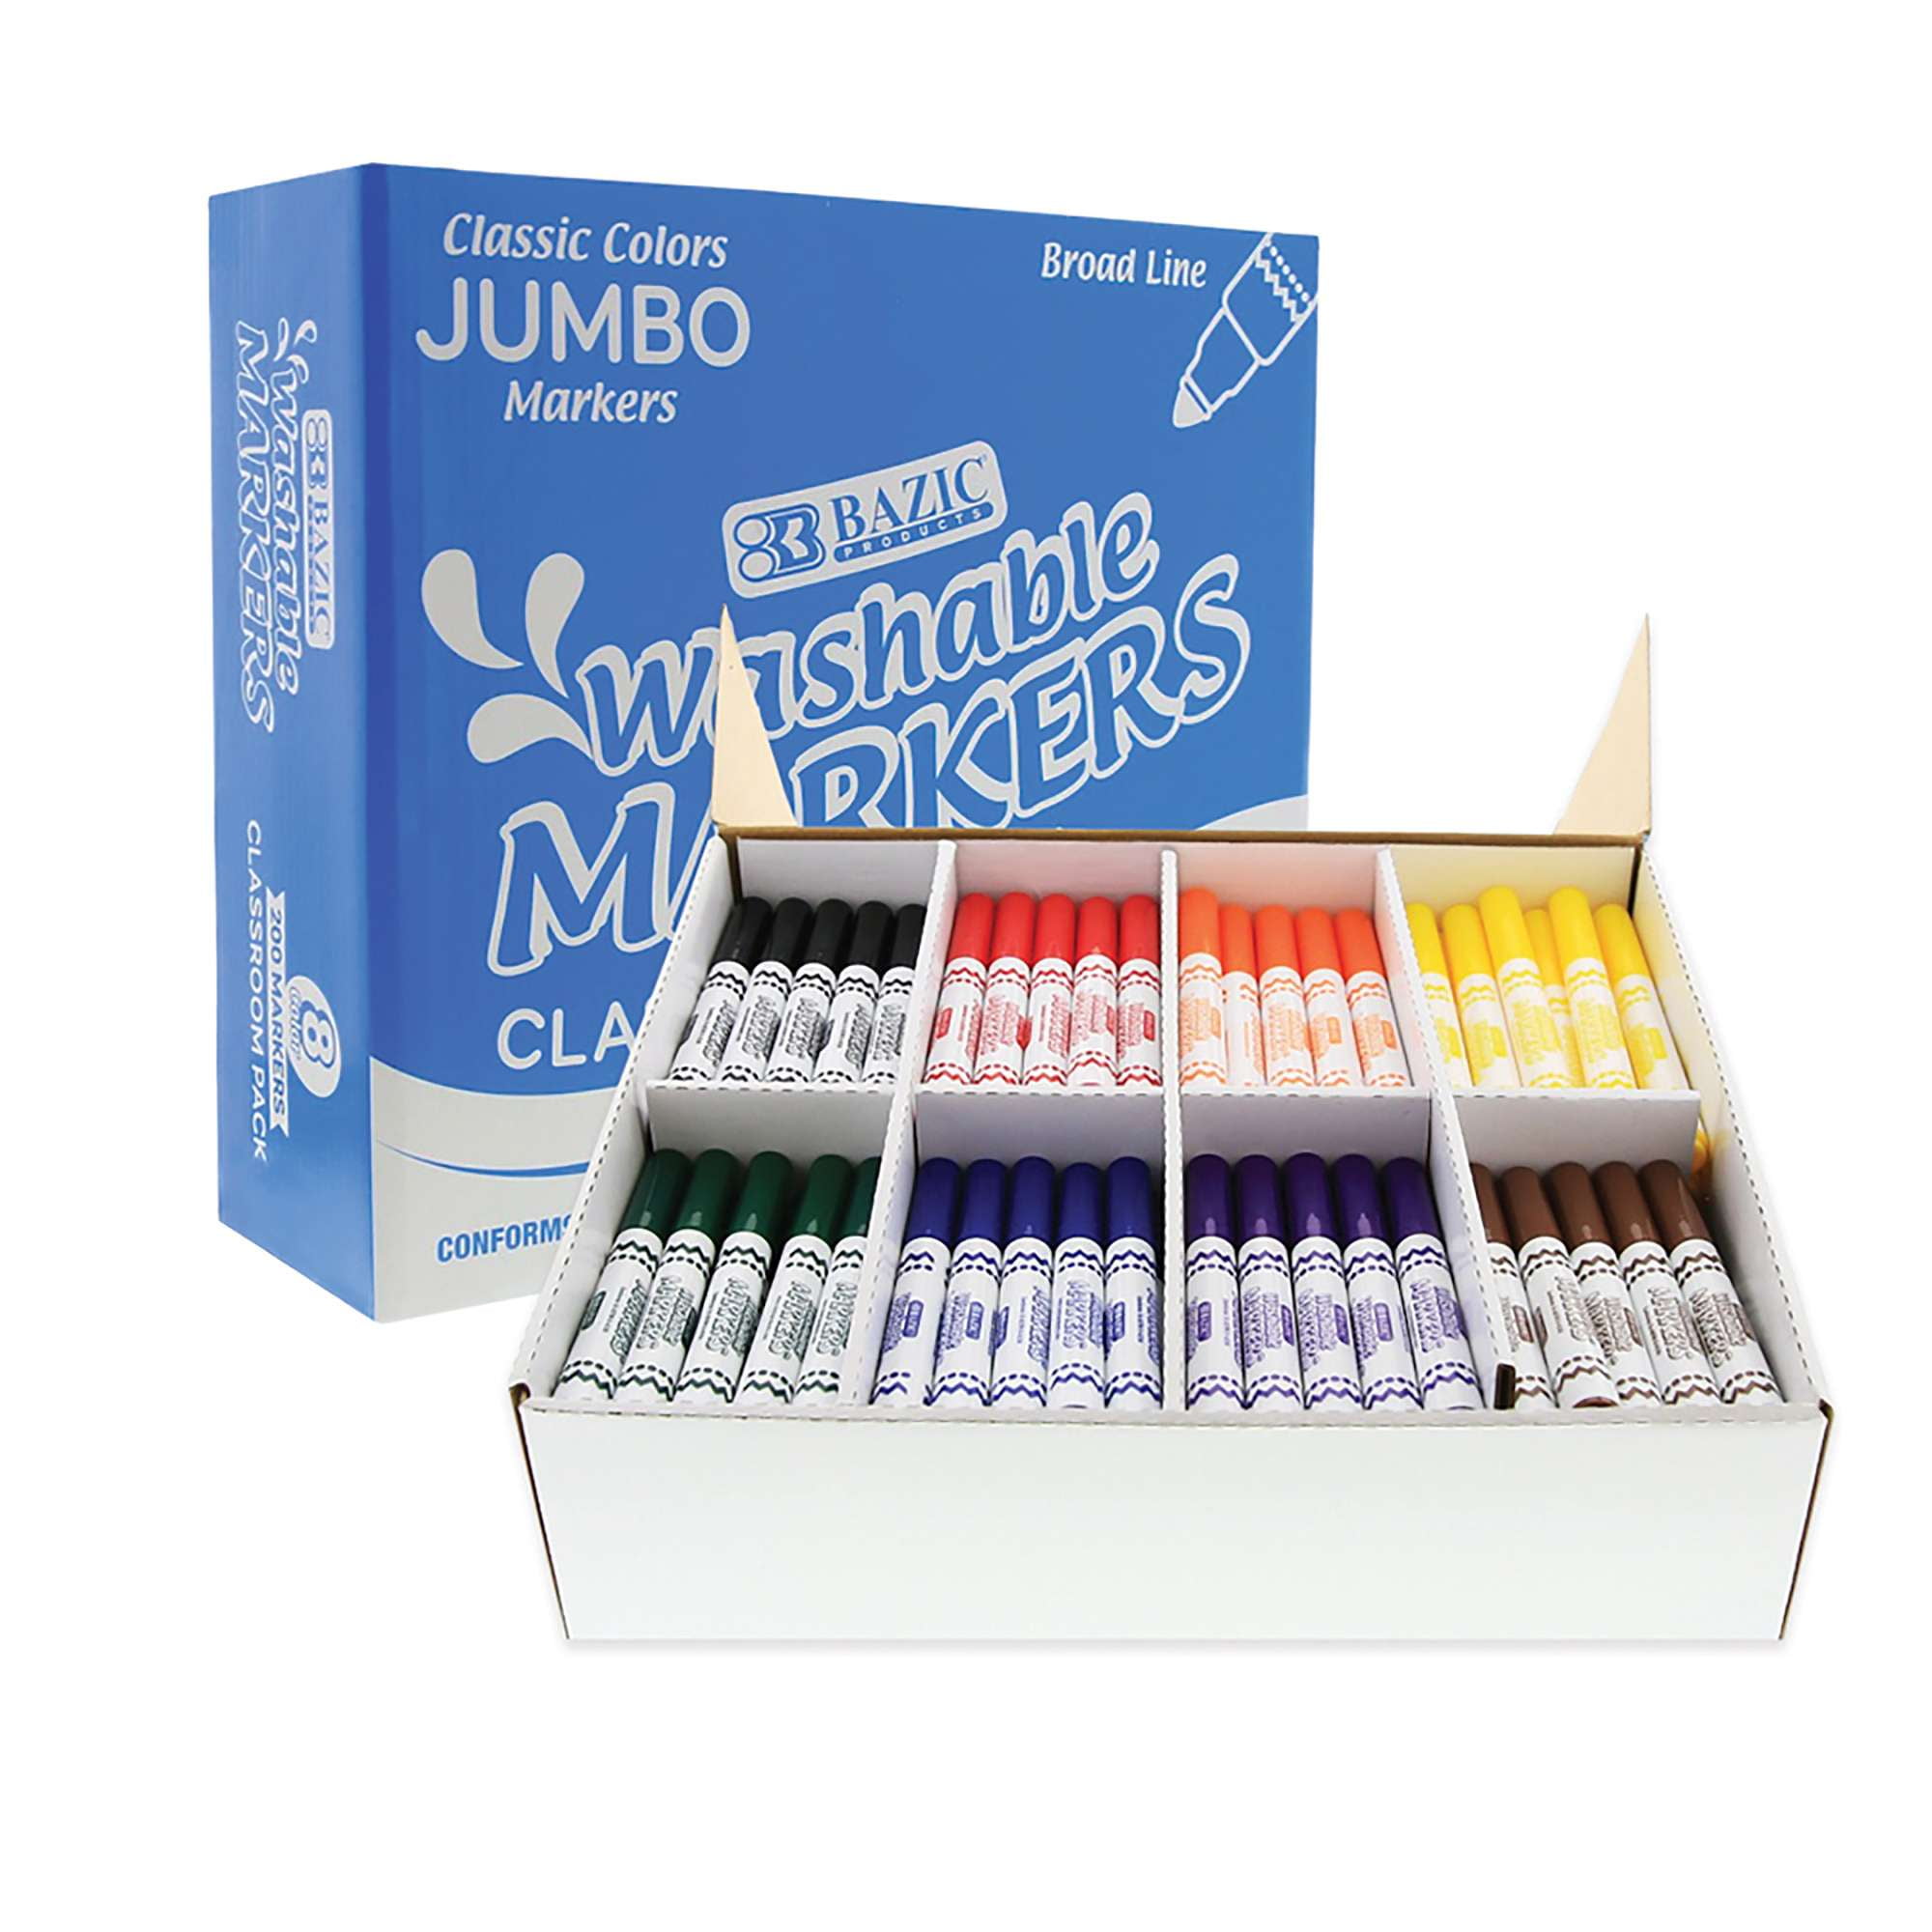 Constructive Playthings BCZ-1235 Jumbo Washable Markers Classroom Pack of 200 Markers in 8 Basic Colors 